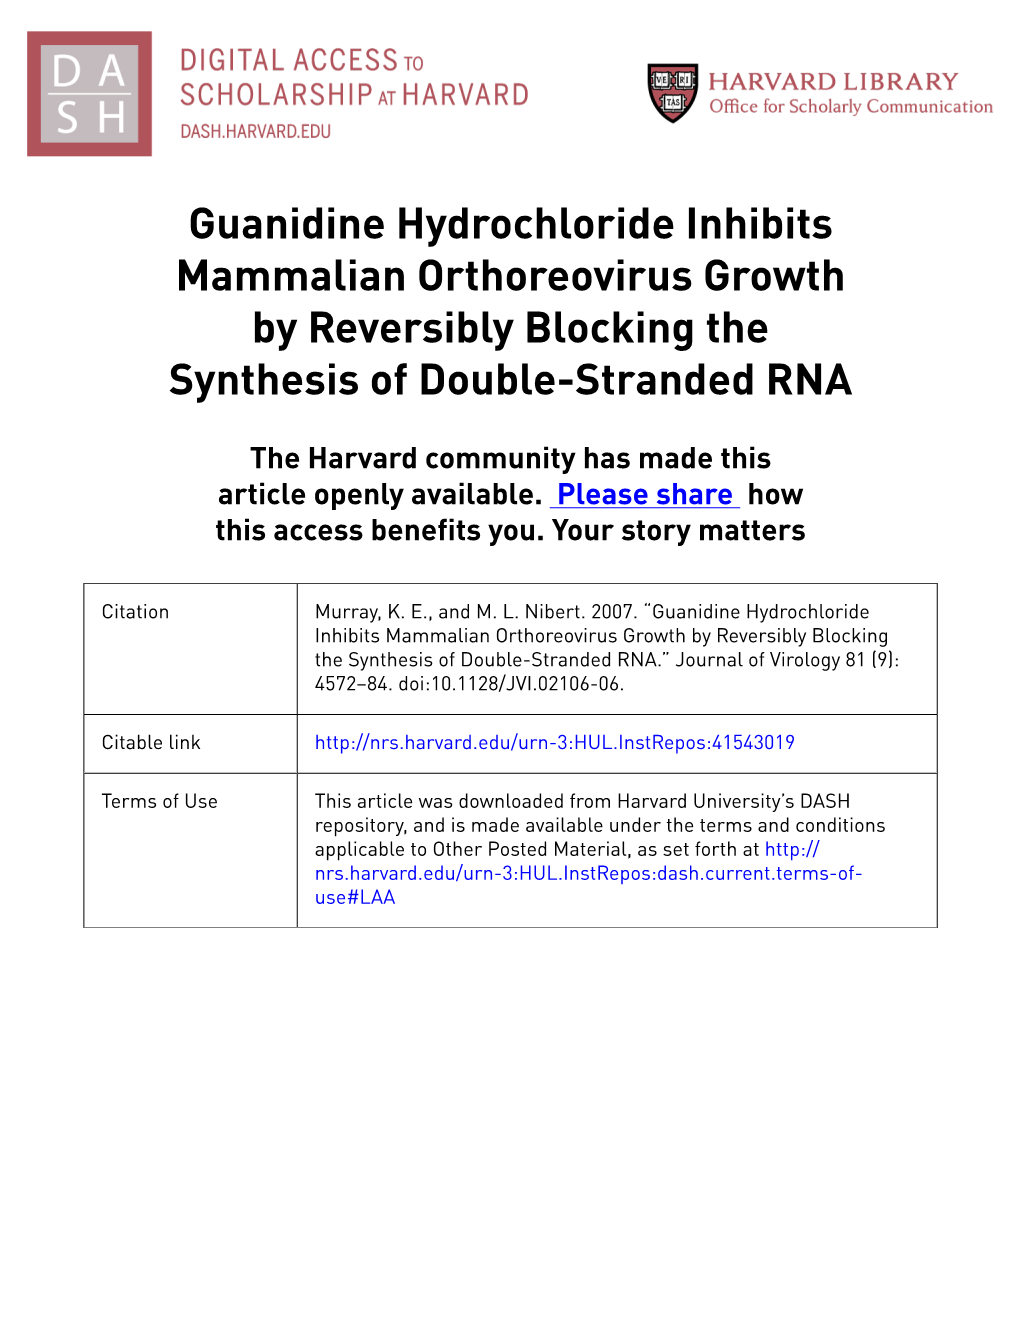 Guanidine Hydrochloride Inhibits Mammalian Orthoreovirus Growth by Reversibly Blocking the Synthesis of Double-Stranded RNA